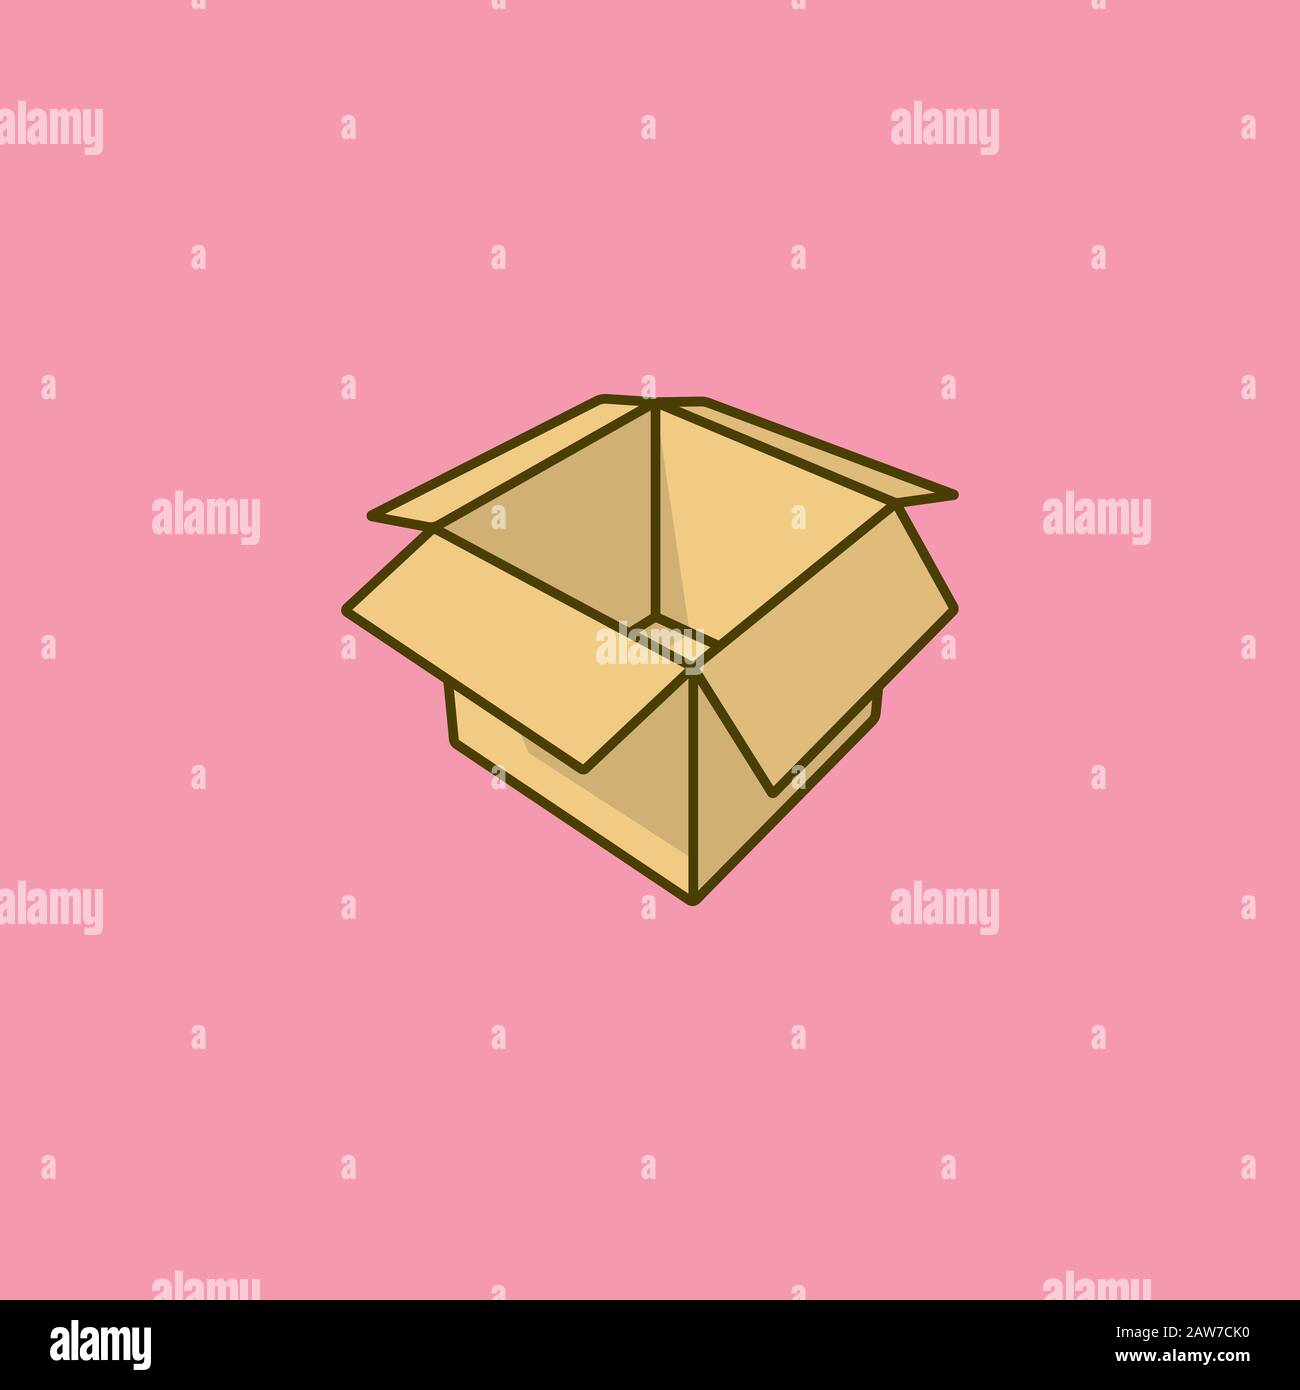 Empty cardboard box illustration for Nothing Day on January 16. Emptiness color vector symbol. Stock Vector